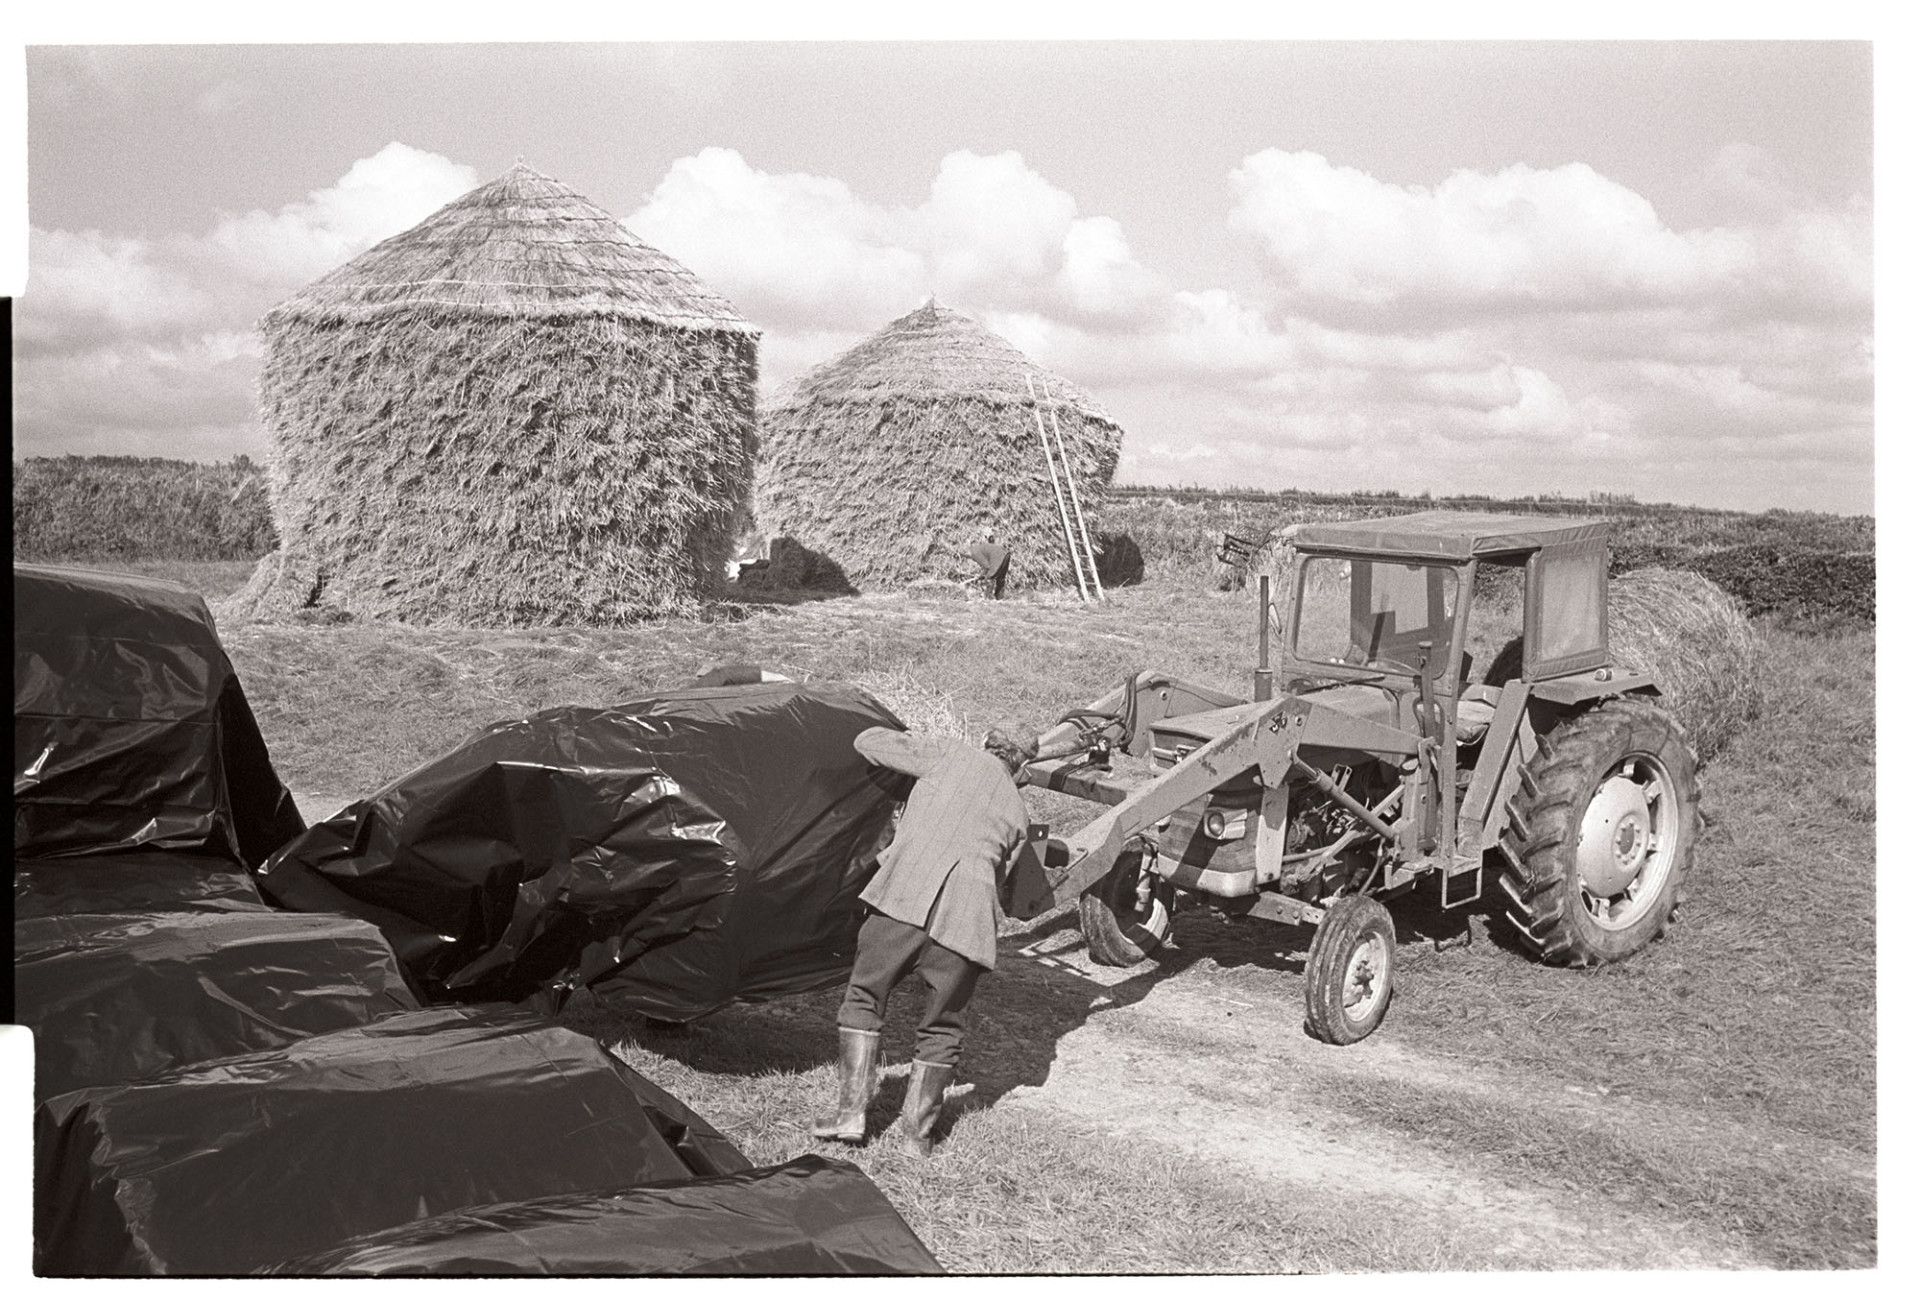 Farmer wrapping large round bales in polythene, round thatched wheat ricks behind. 
[Dudley Middleton wrapping hay bales in polythene in a field at Westacott, Riddlecombe. The bales are on a fork lift attached to a tractor. Two thatched wheat ricks are in the background. A ladder is propped against one of the ricks.]